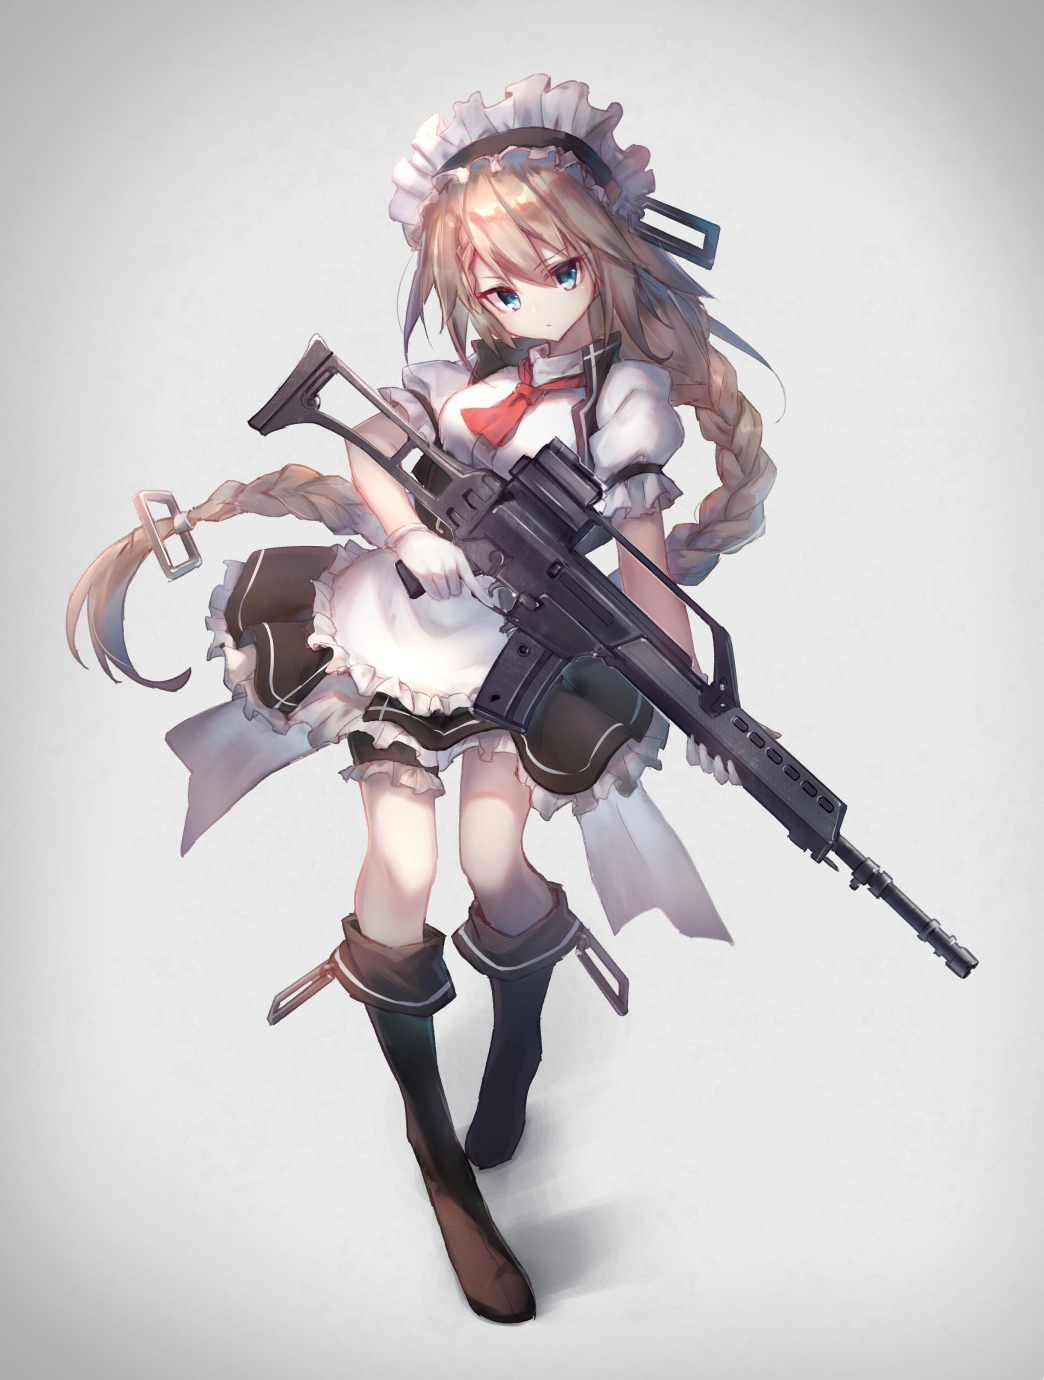 1girl apron assault_rifle blonde_hair blue_eyes boots braid braided_ponytail commentary commentary_request g36_(girls_frontline) girls_frontline gloves gun h&amp;k_g36 highres liebe long_hair looking_at_viewer magazine_(weapon) maid maid_apron maid_headdress rifle scope skirt trigger_discpiline very_long_hair vest weapon